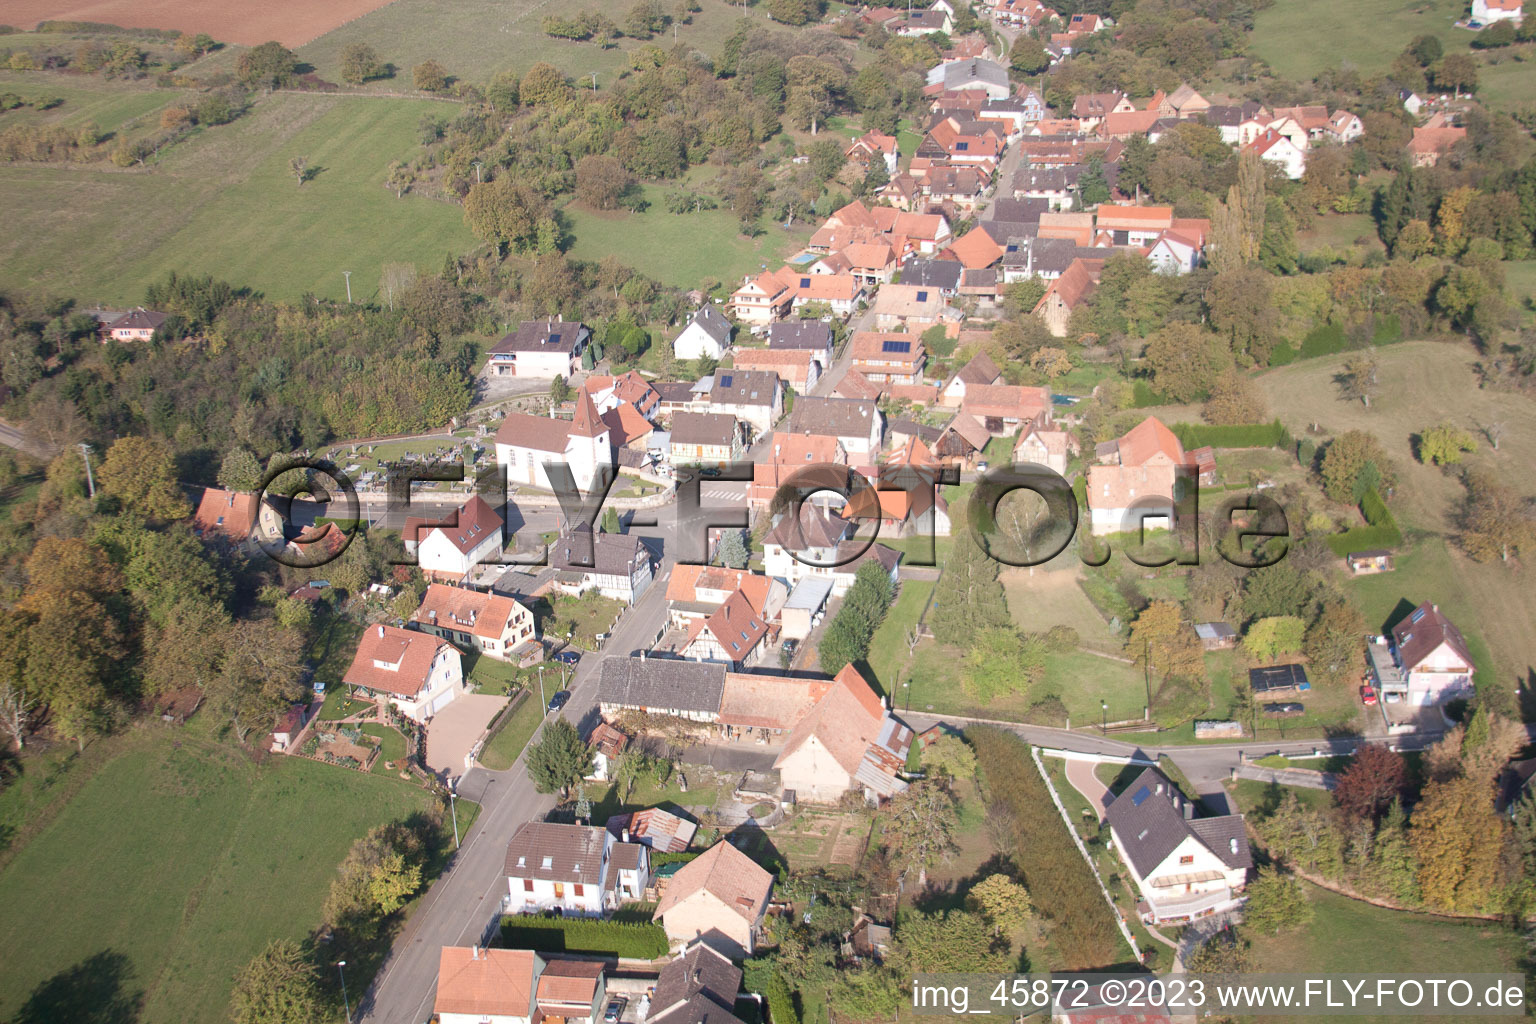 Drone image of Mitschdorf in the state Bas-Rhin, France